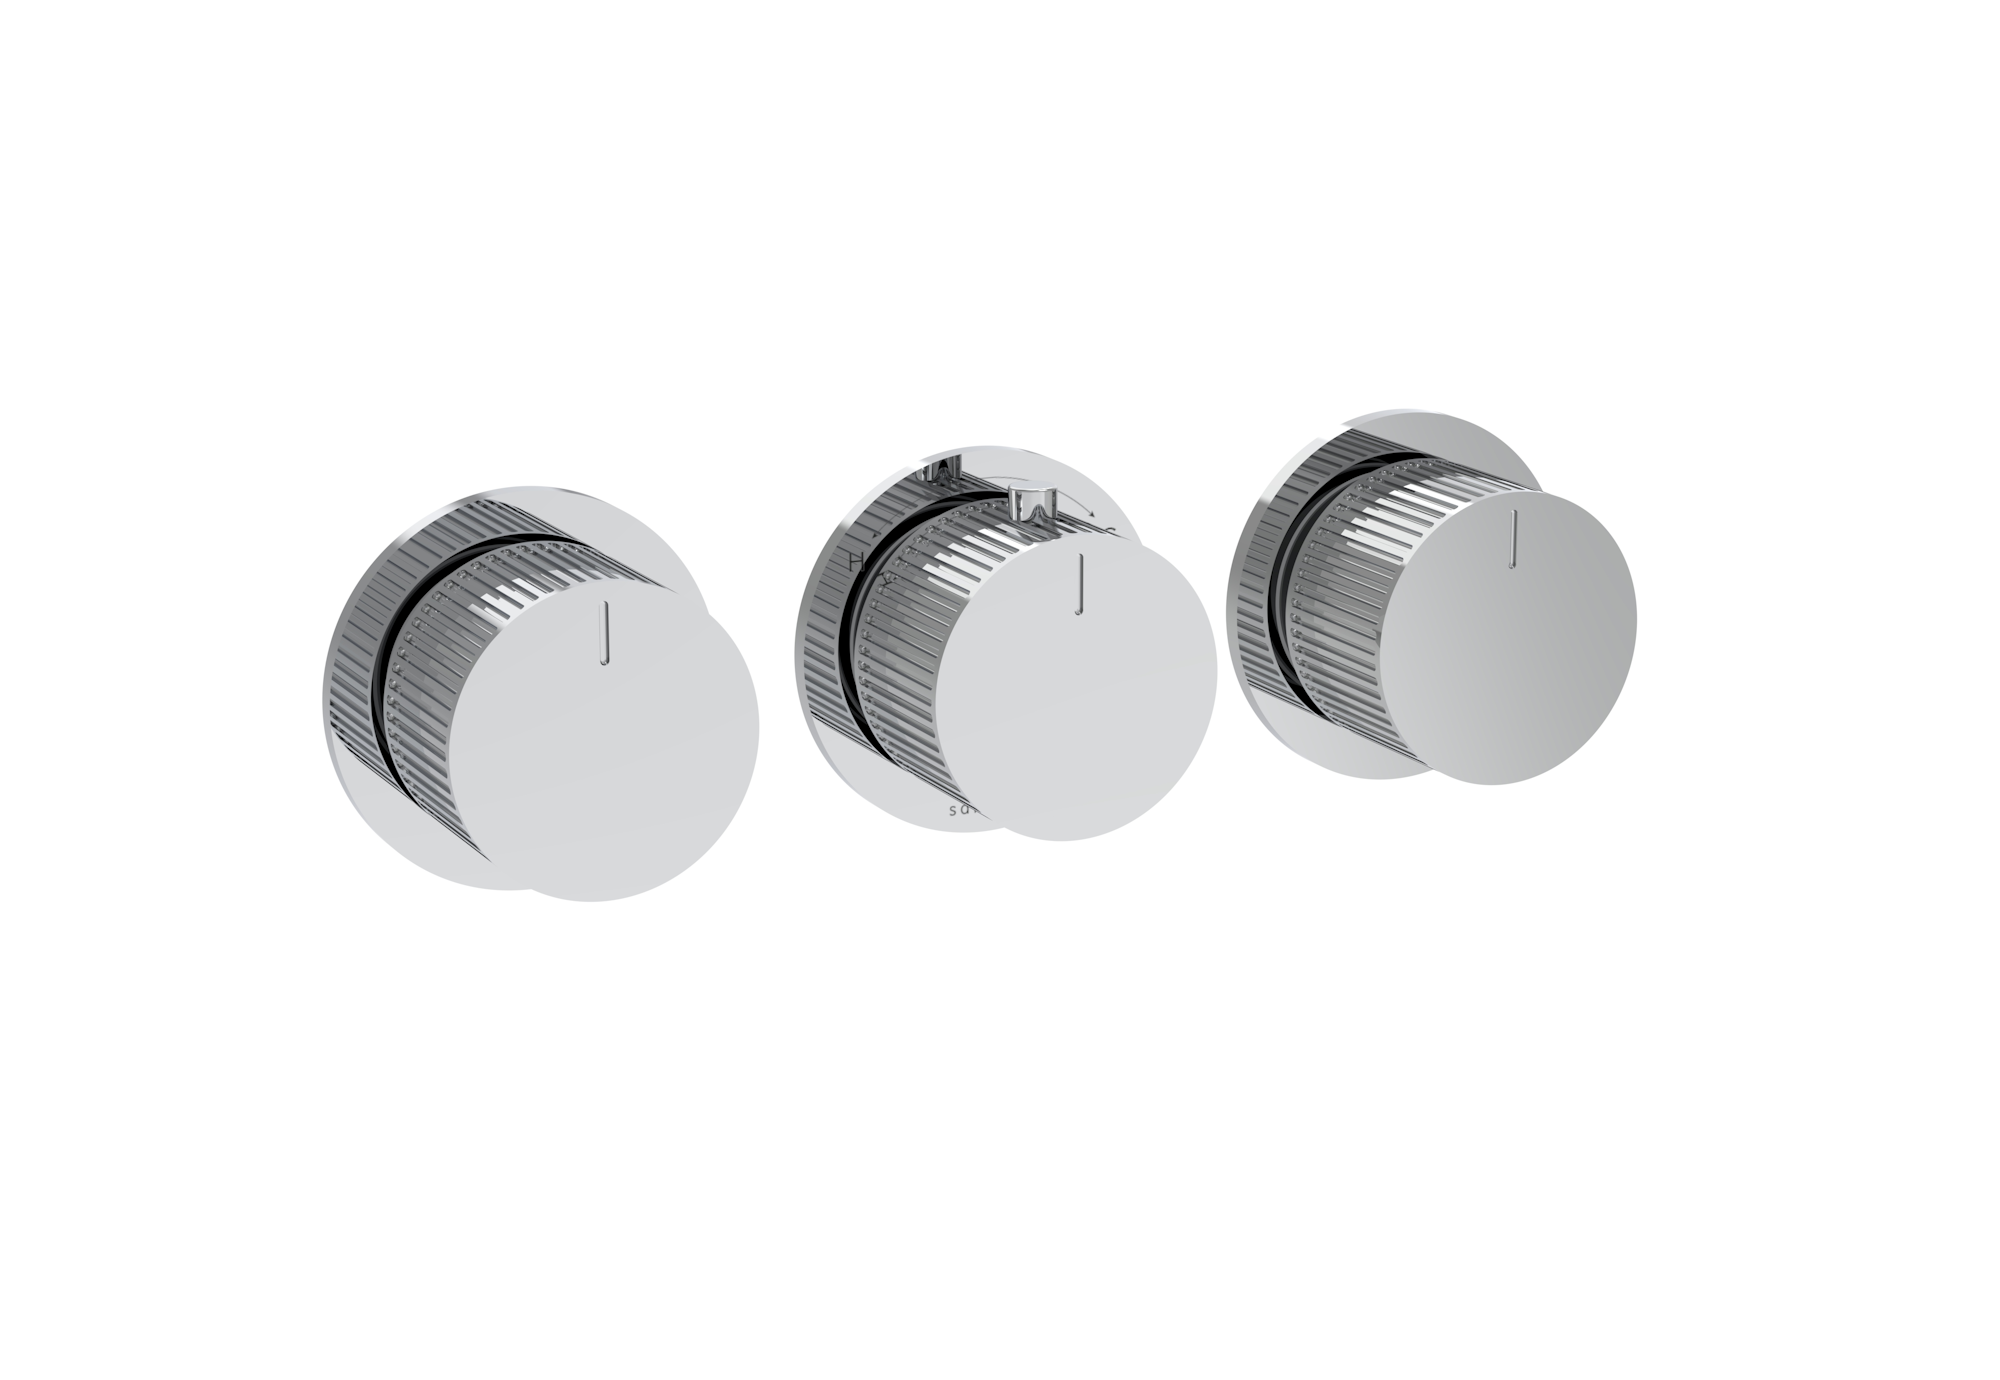 COS 3 Way Thermostatic Shower RING Valve KIT - w/ Fluted Handle - Landscape - Chrome